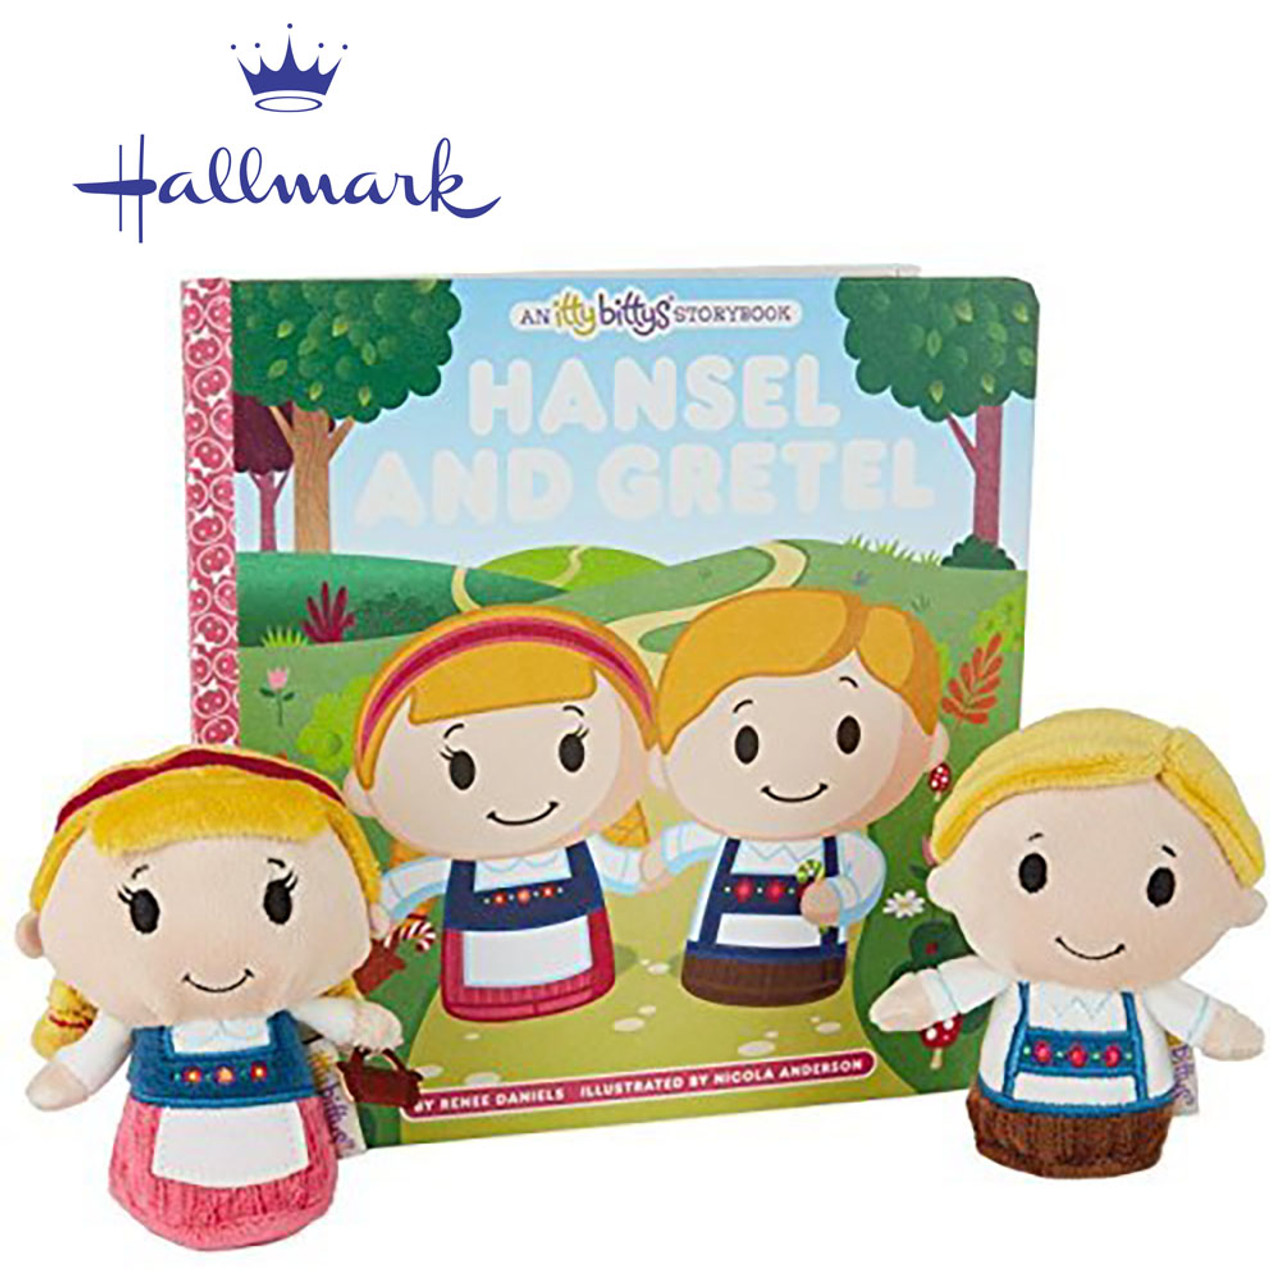 Hallmark itty bittys® Hansel and Gretel Storybook Set with 2 Stuffed Toys product image